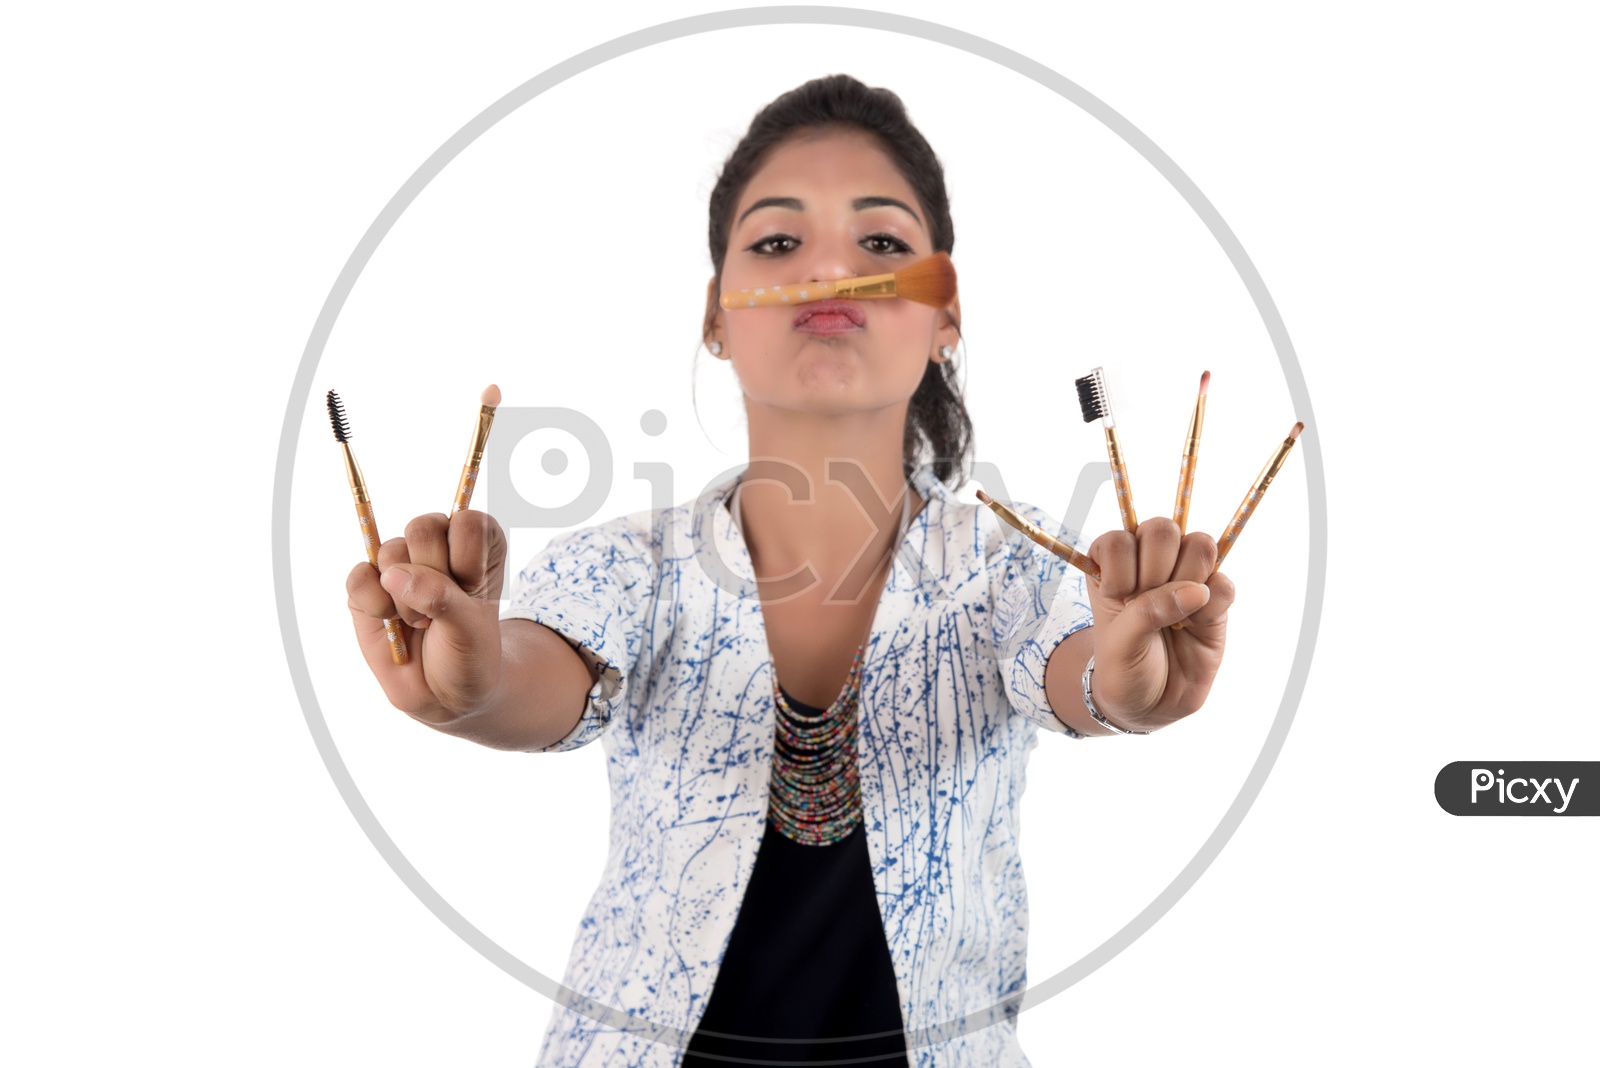 Young Beautiful Girl Enjoying With Makeup Brush On an Isolated White Background